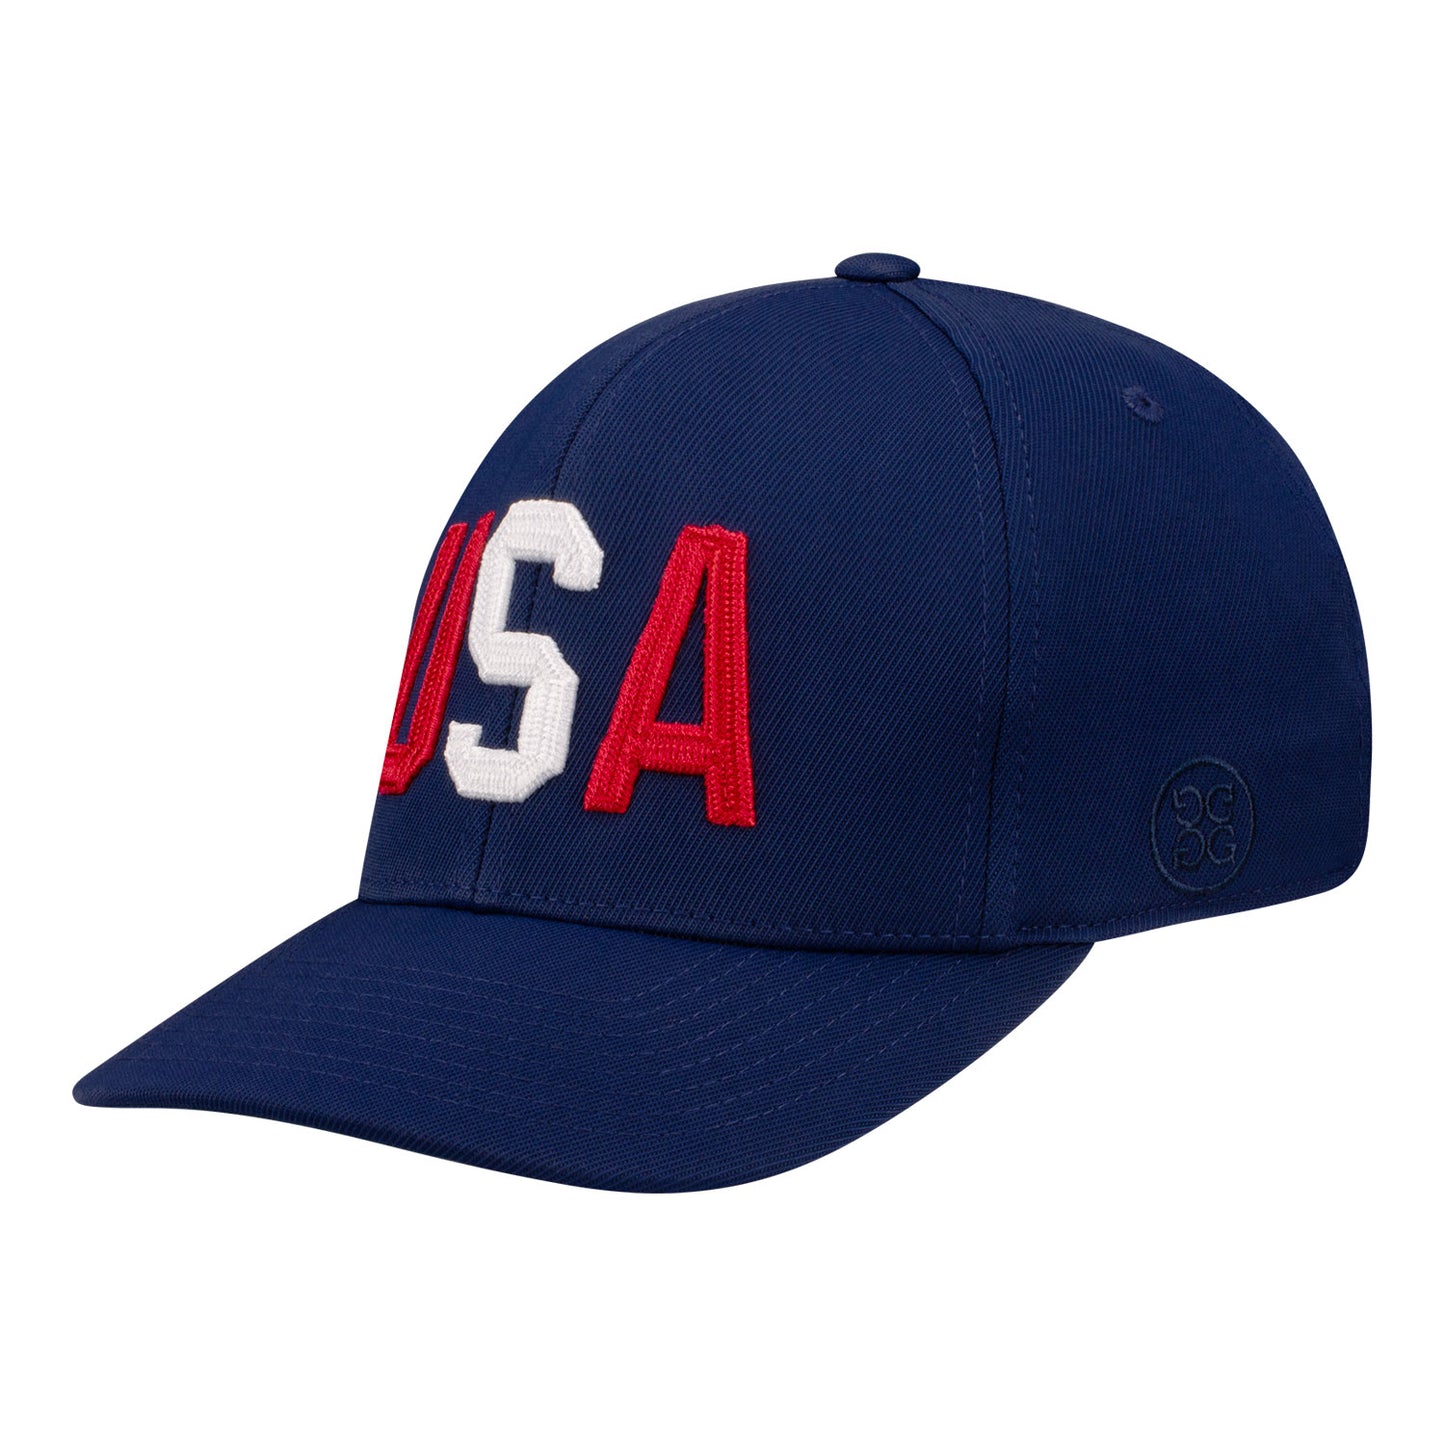 G/Fore LPGA USA Block Text Hat - Angled Left Side View